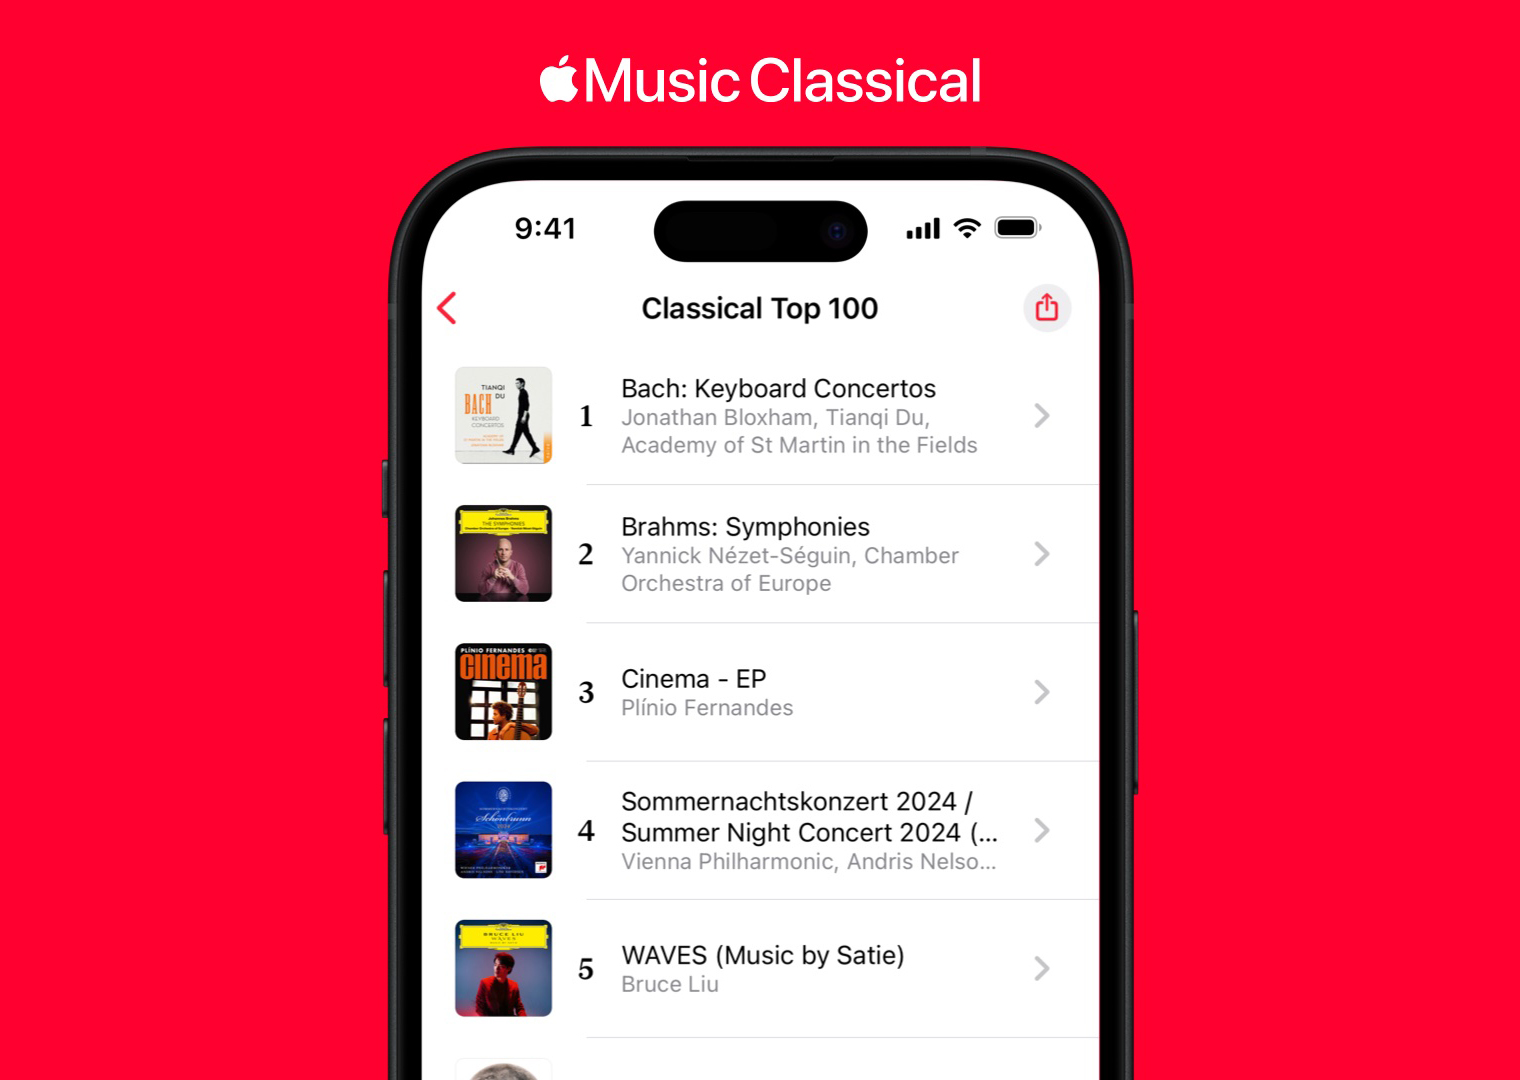 The most popular classical music is now available in Apple’s new weekly Top 100 chart